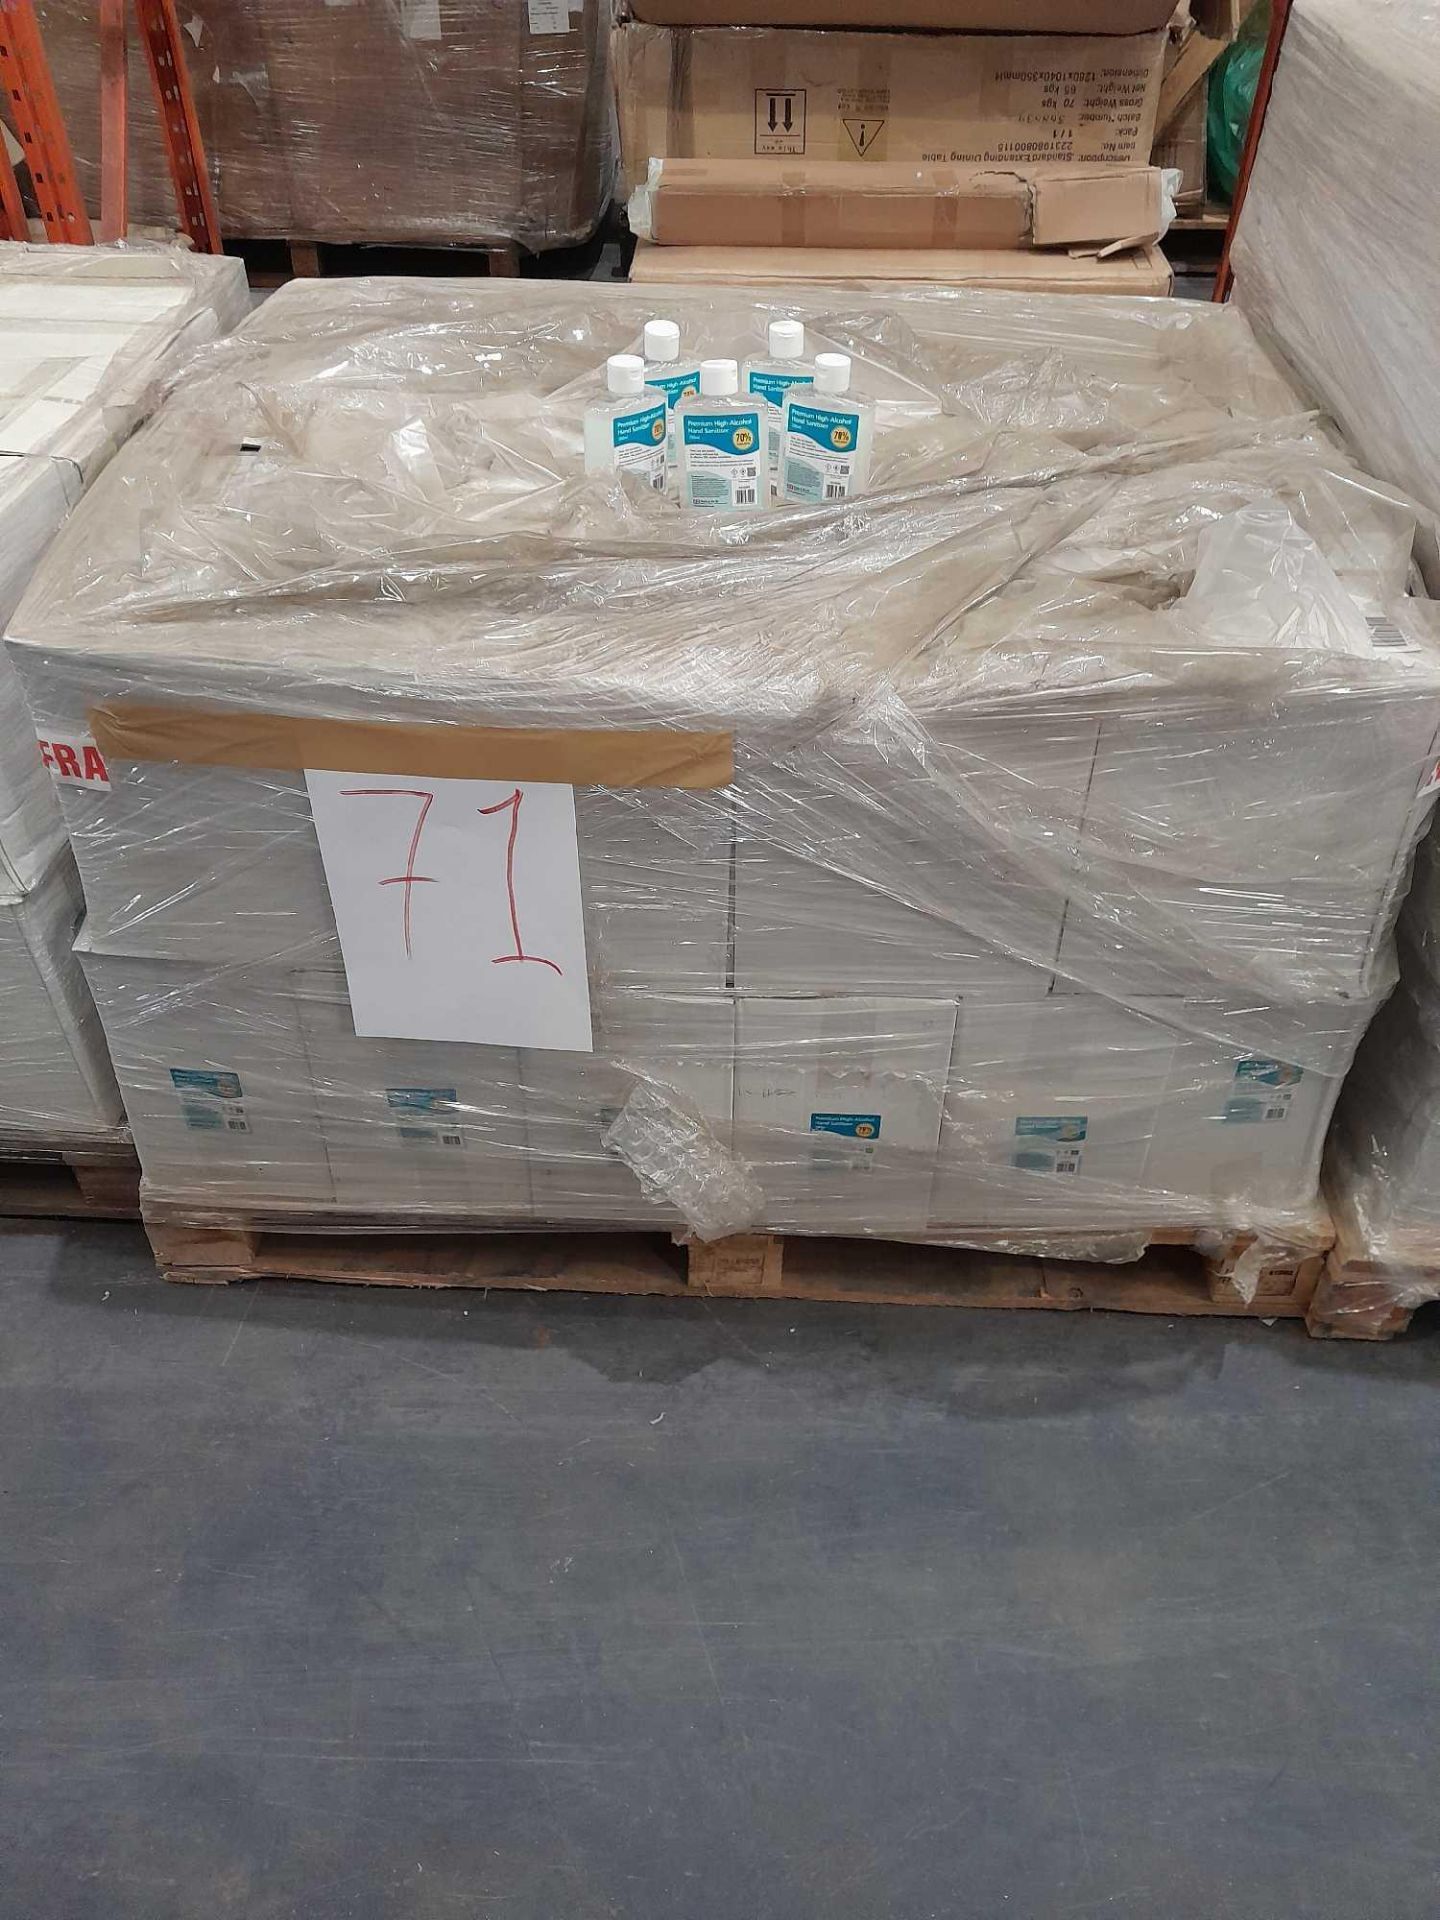 RRP £6,700 Pallet To Contain 40 Boxes Of Hand Sanitisers. (24 Bottles Per Box)(Pictures Are For